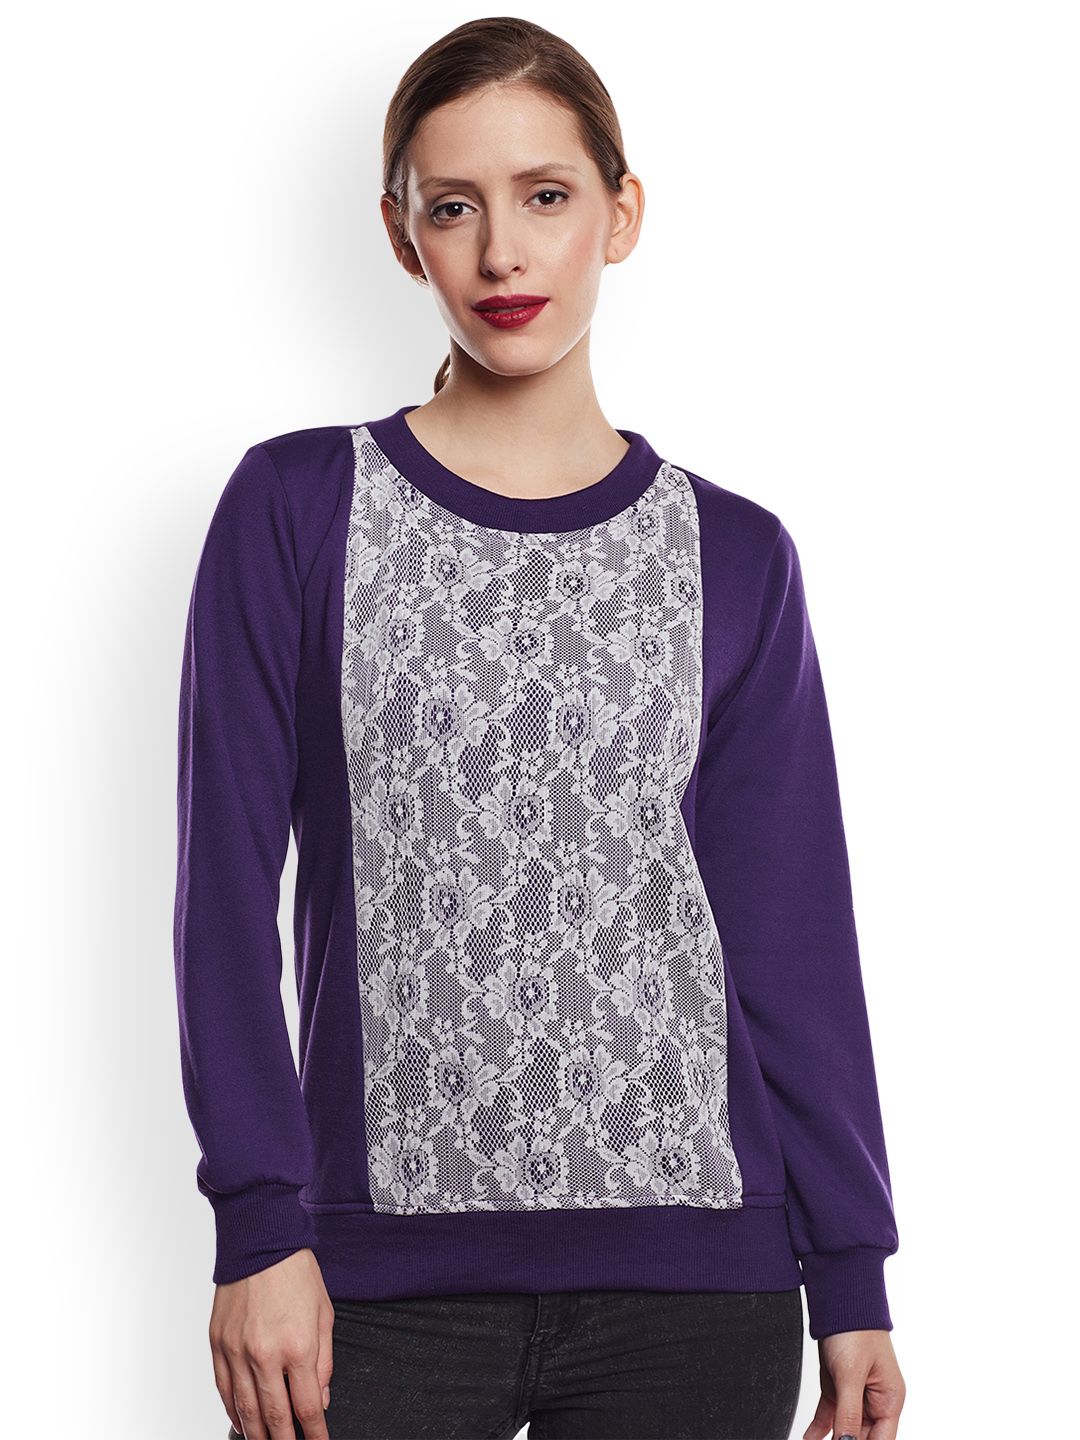 Belle Fille Women Purple Solid Sweatshirt with Lace Detail Price in India